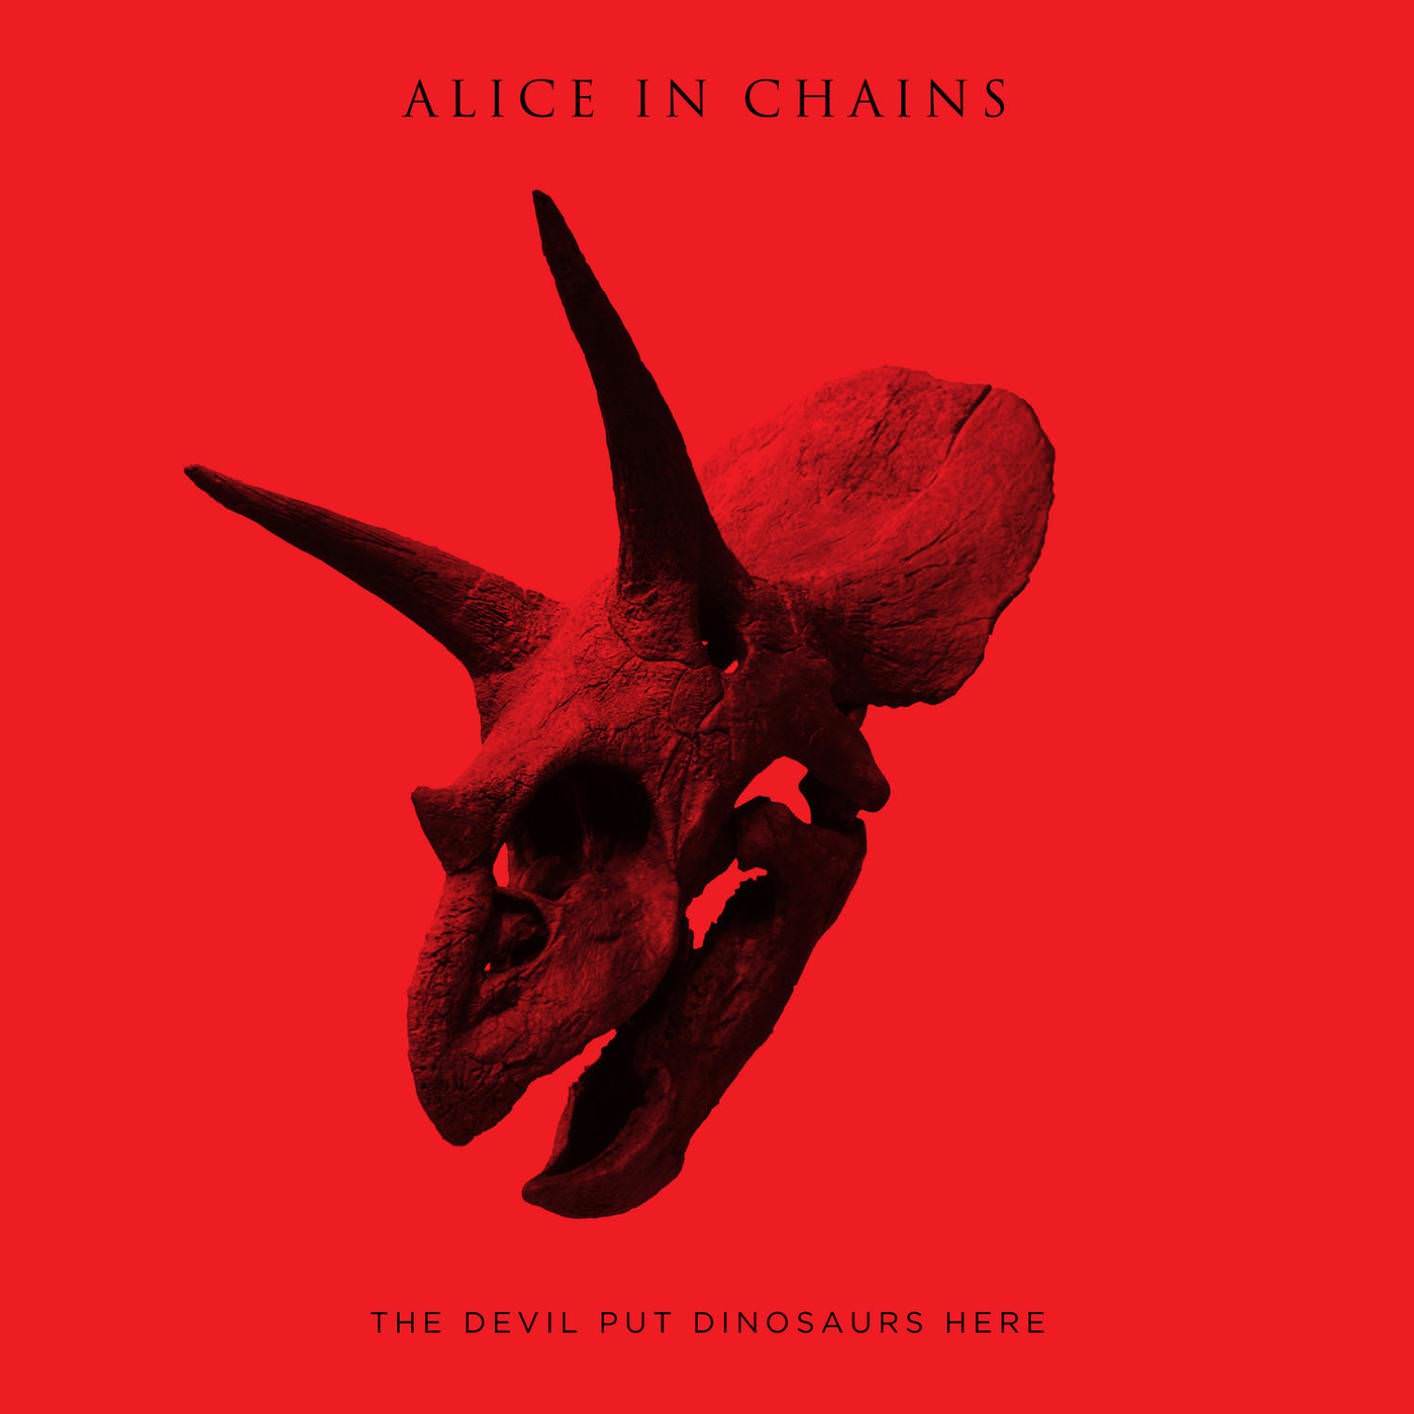 Alice in Chains – The Devil Put Dinosaurs Here (2013/2018) [FLAC 24bit/96kHz]